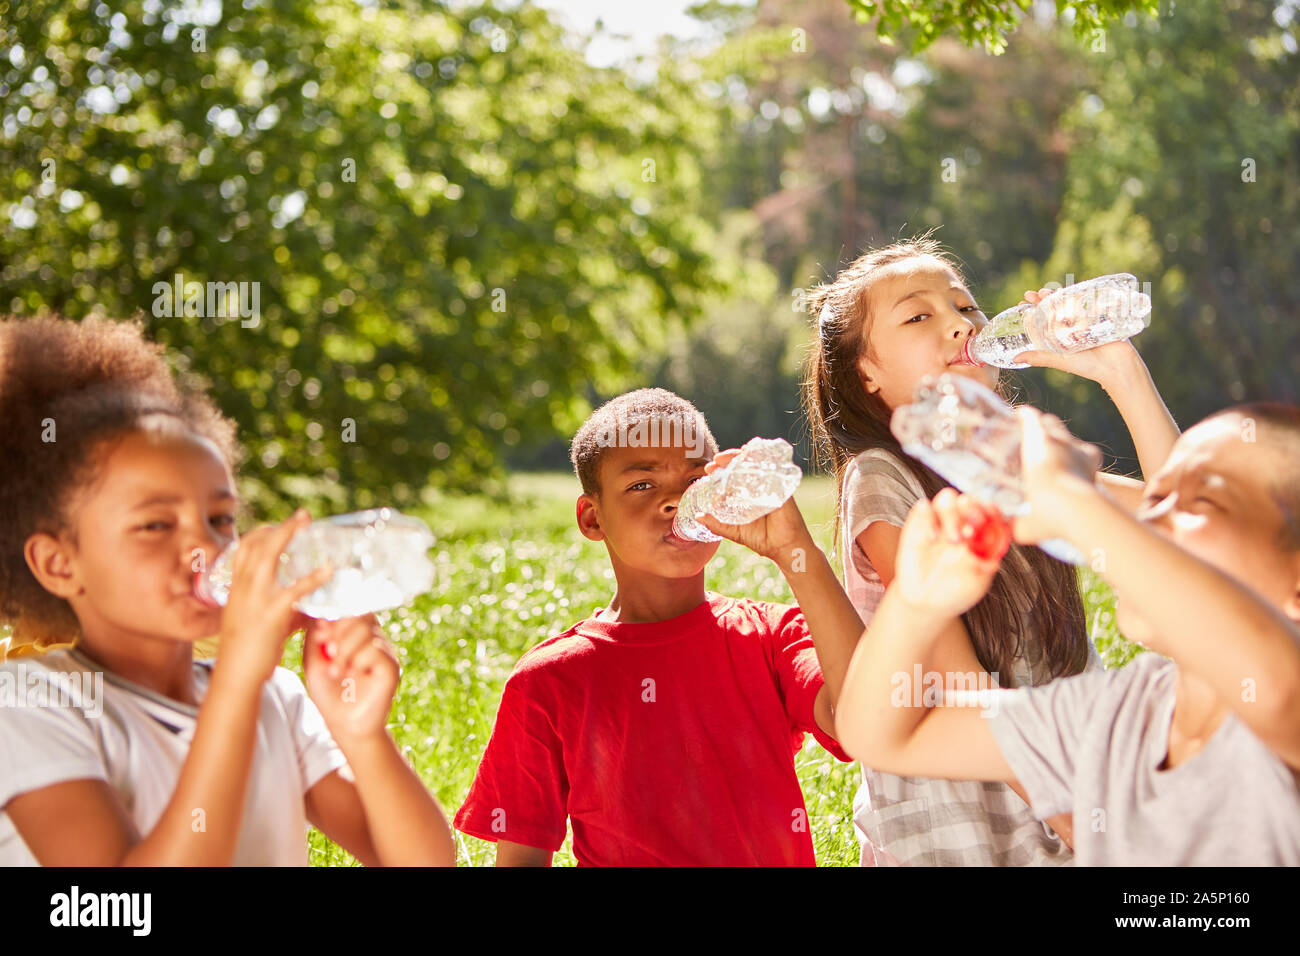 Multicultural kids drink bottled water during summer outing Stock Photo